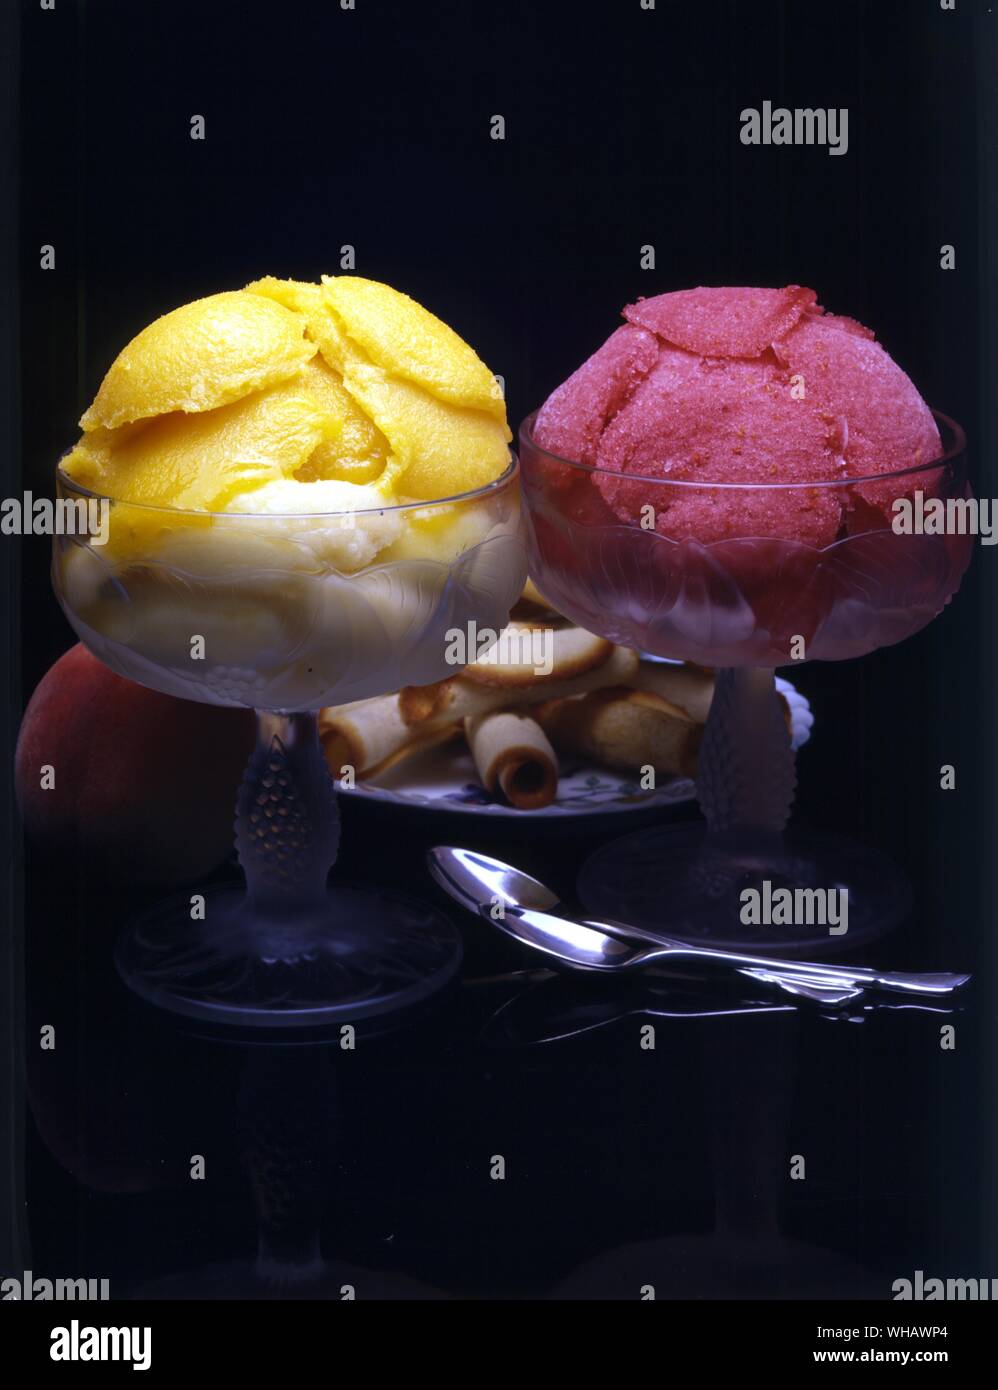 Raspberry sorbet in dish with scoop and served in sorbet glasses on doilies  Stock Photo - Alamy